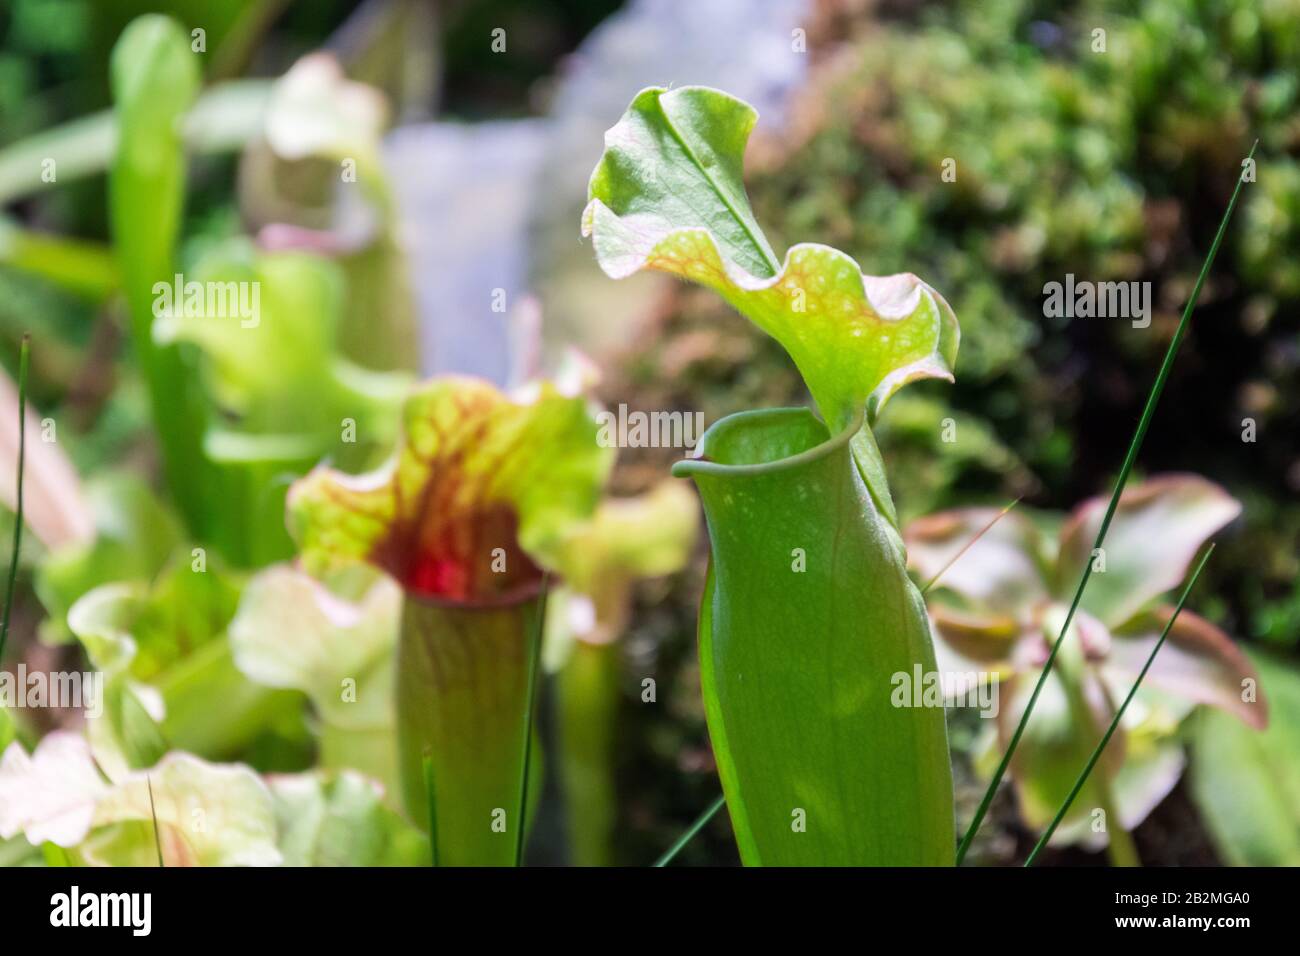 Sarracenia insect eating plant, close-up view growing in garden Stock Photo